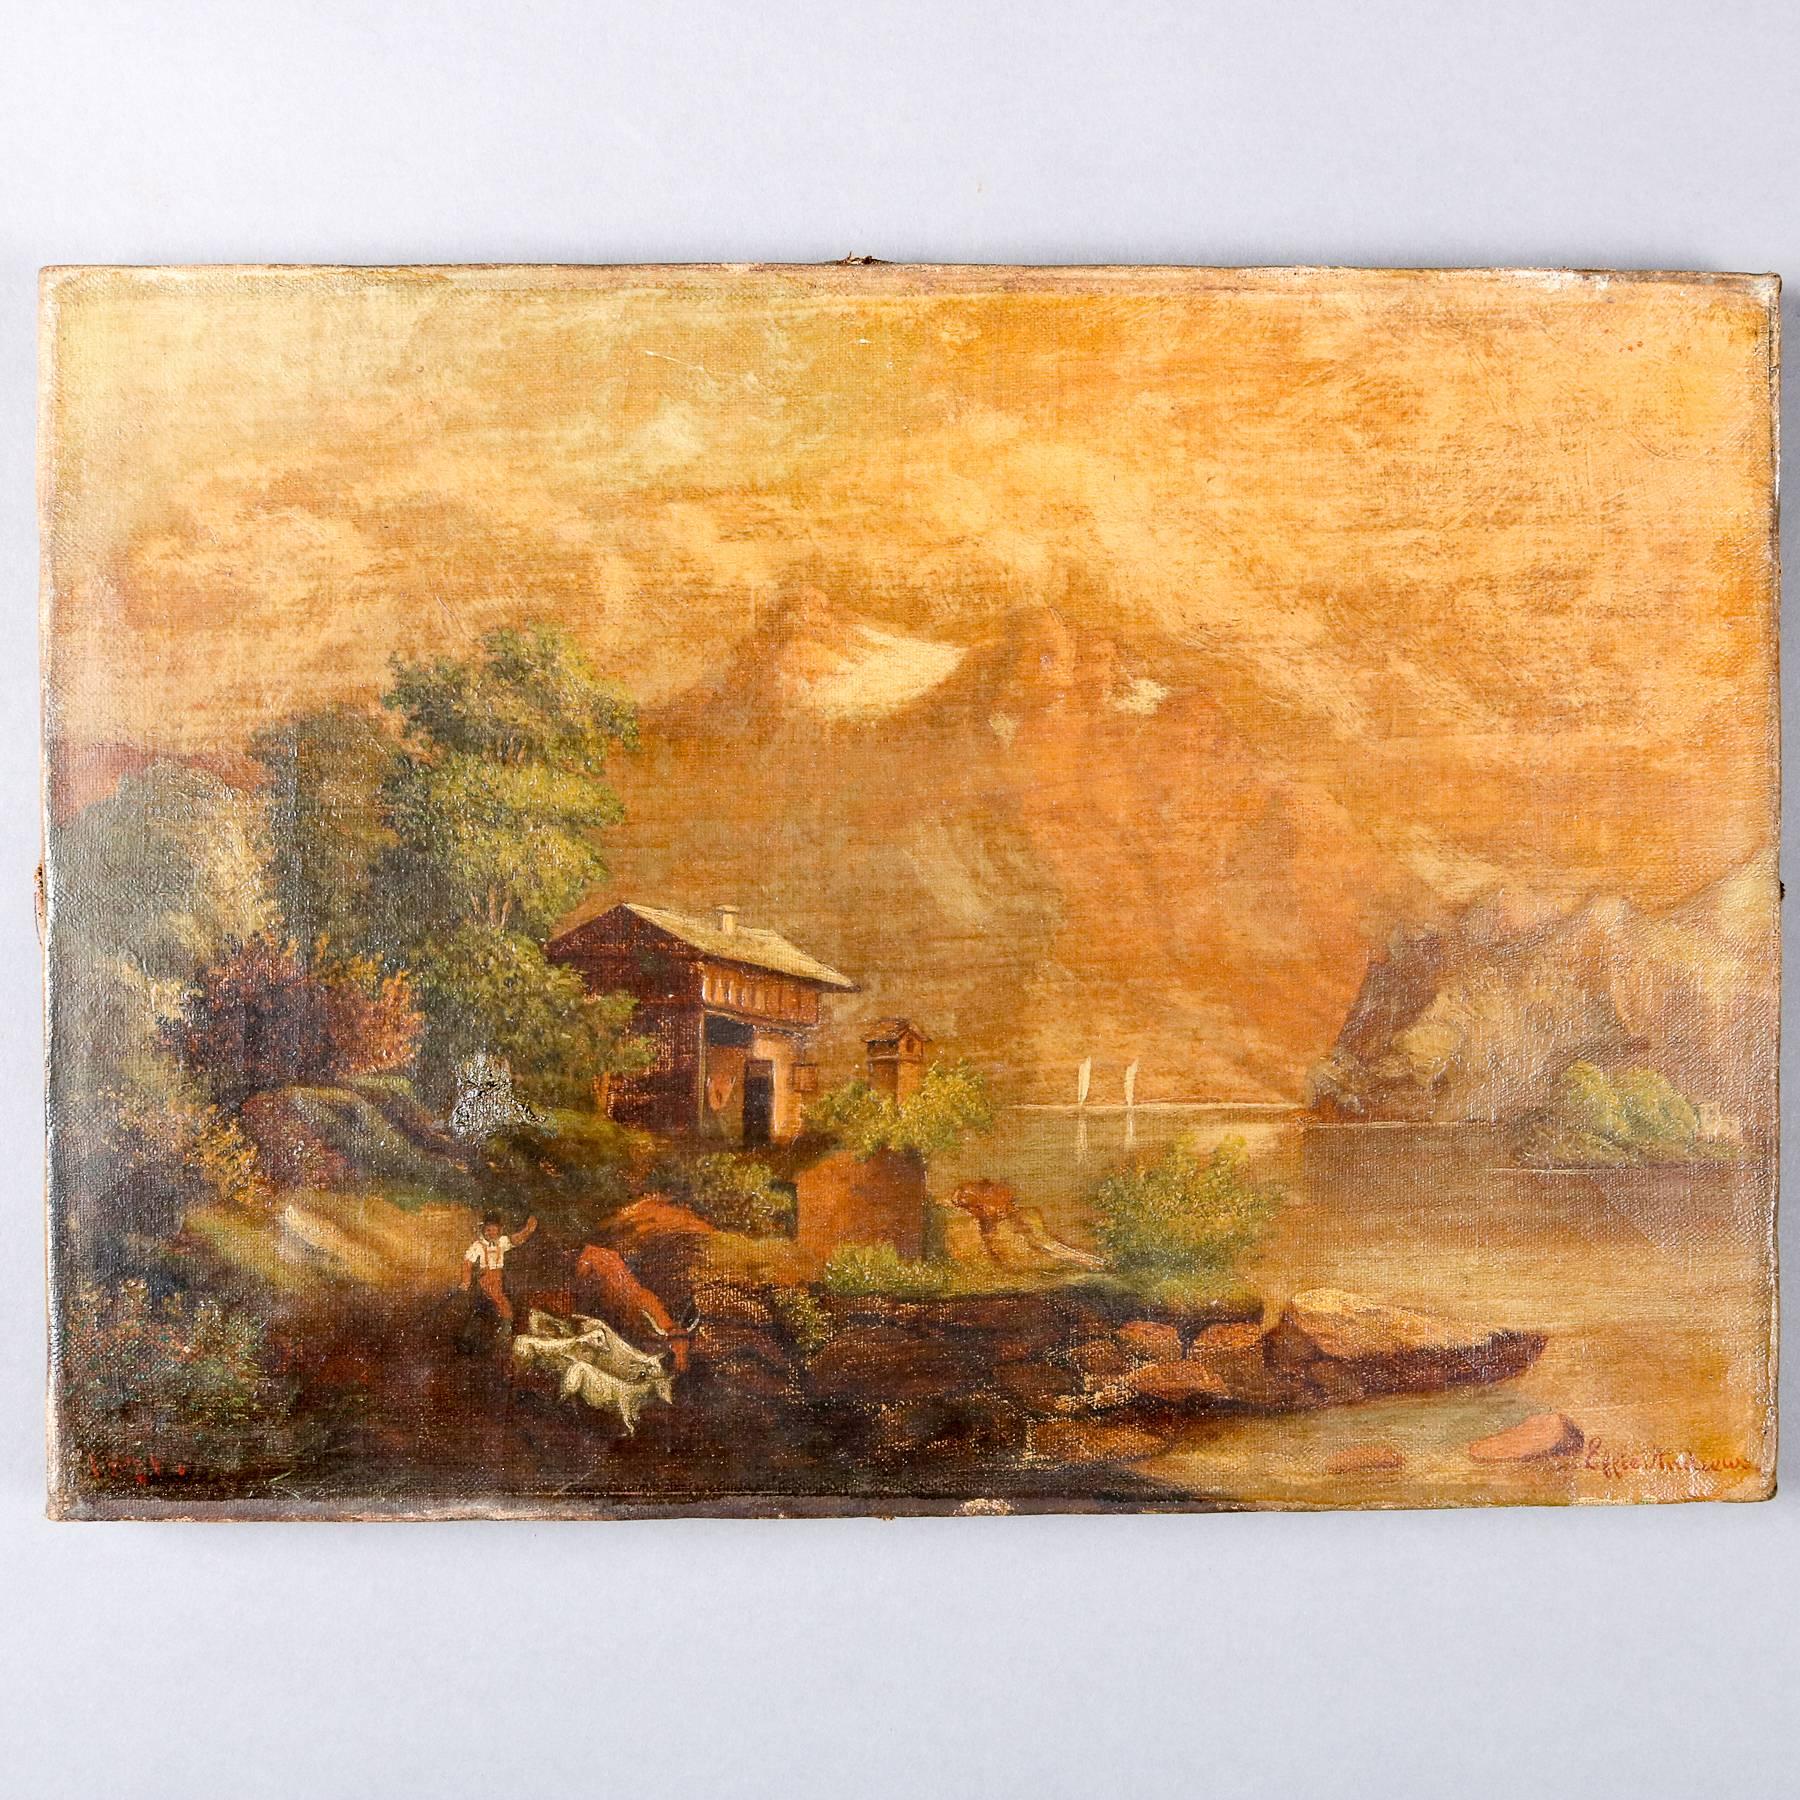 Antique oil on canvas landscape painting by Effie Andres depicts snow capped mountain scene with lake farm house and cattle, signed lower left, 19th century

Measures - 10